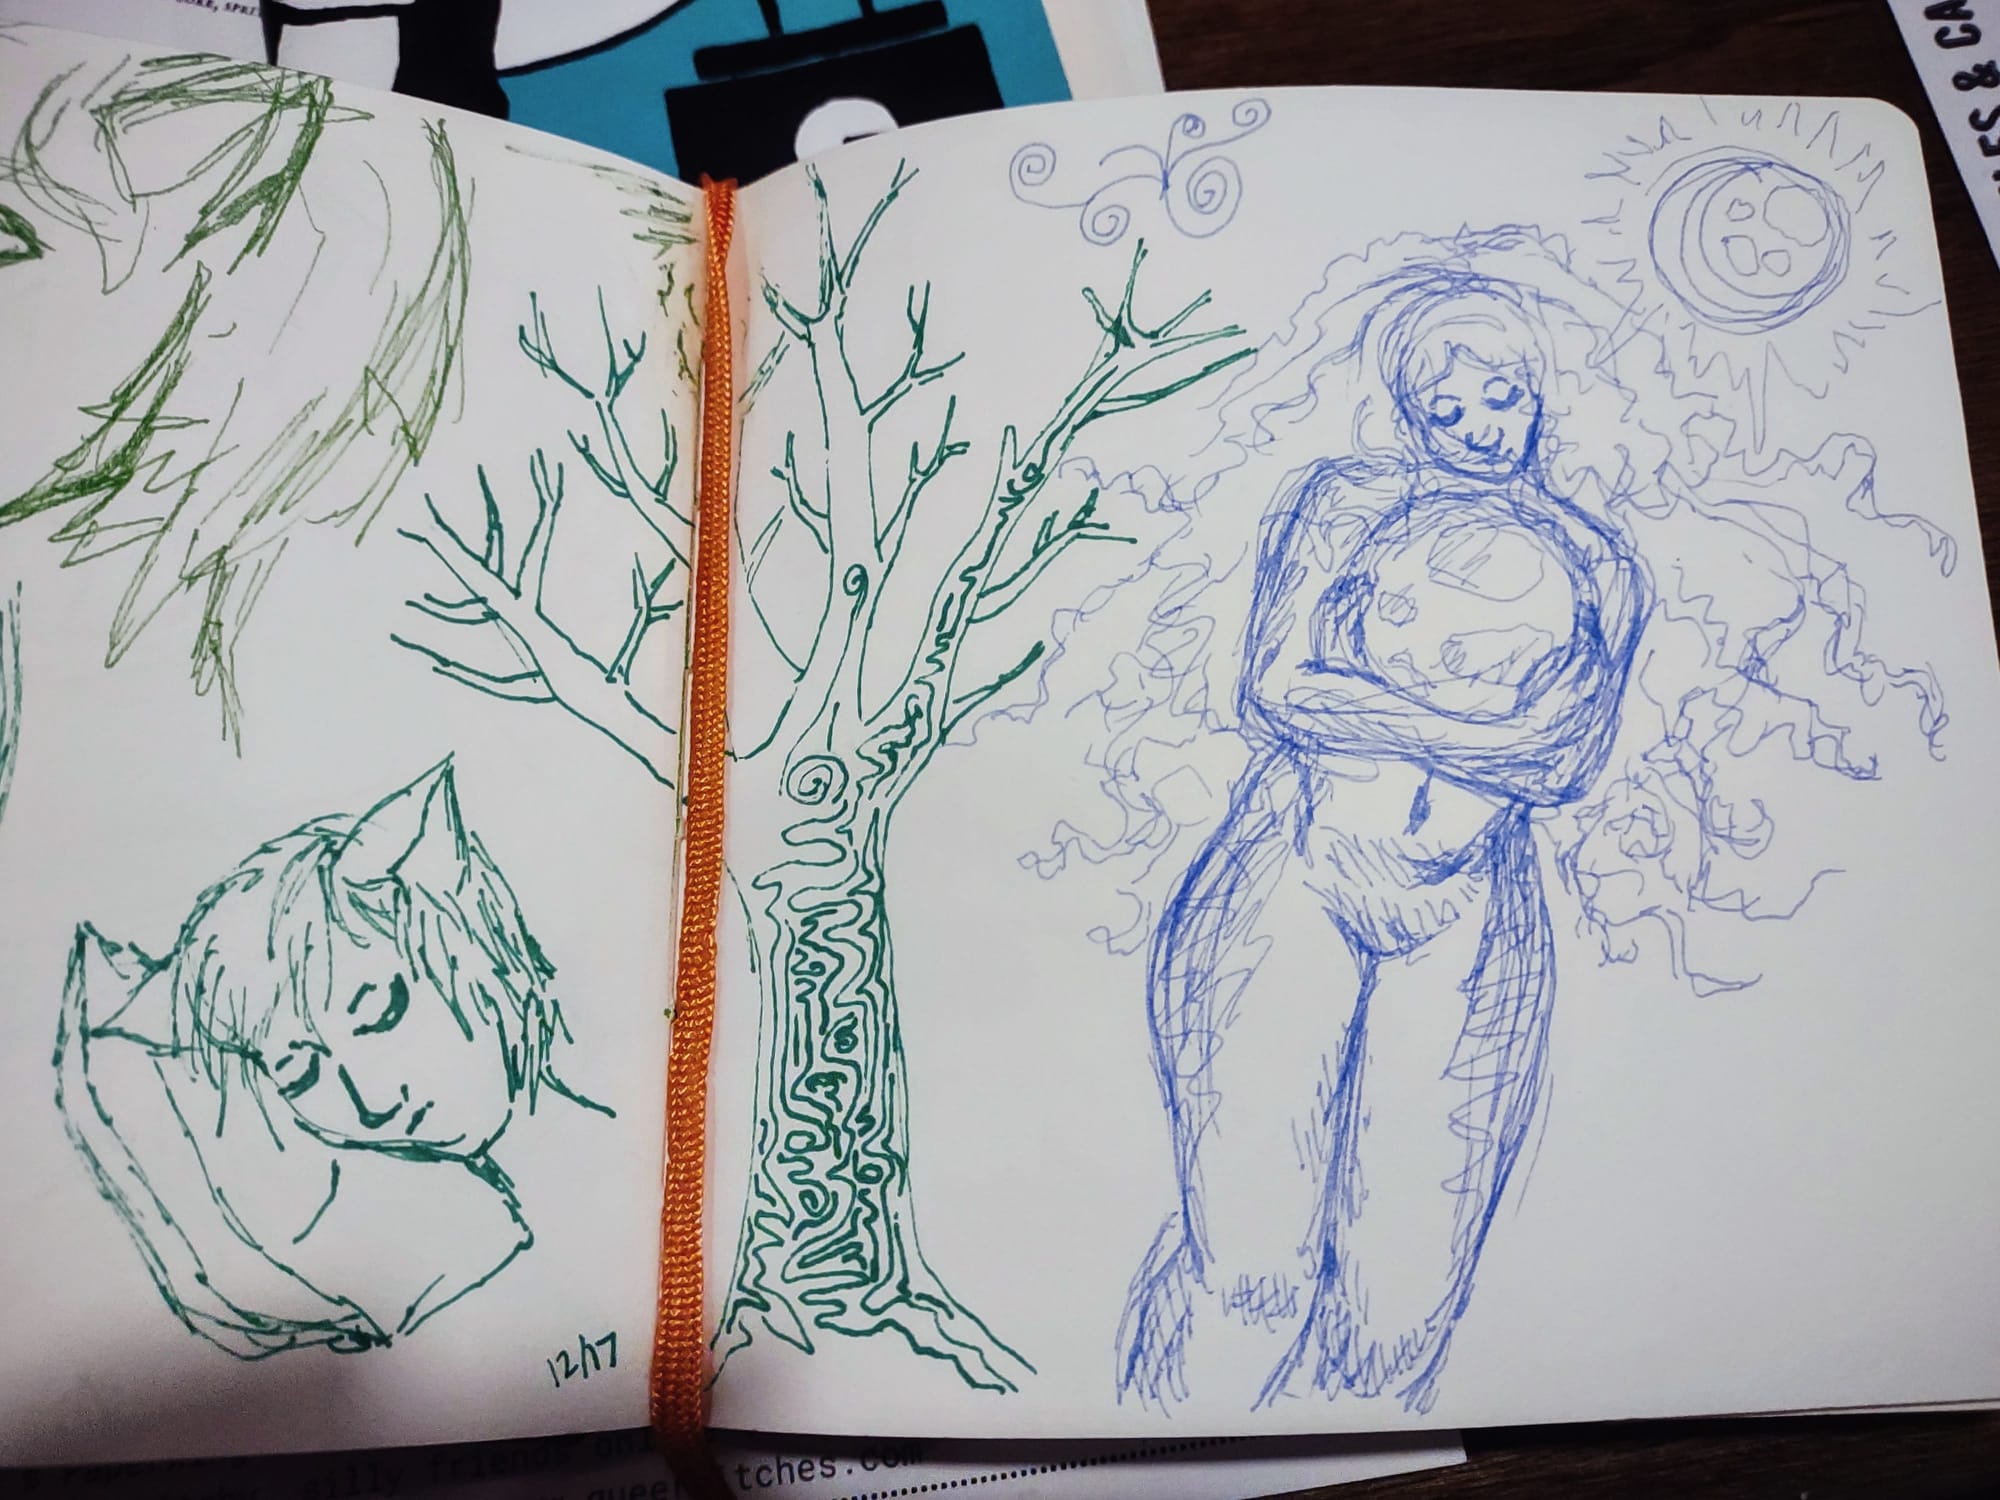 Sketchbook open to two pages of pen drawings, with only part of the left page shown. Left page: head and neck of a short-haired person with cat ears sleeping on a pillow. Right: a leafless tree with a squiggly pattern over the trunk, and then, a nude woman with long curly hair cradling a moon in her arms.